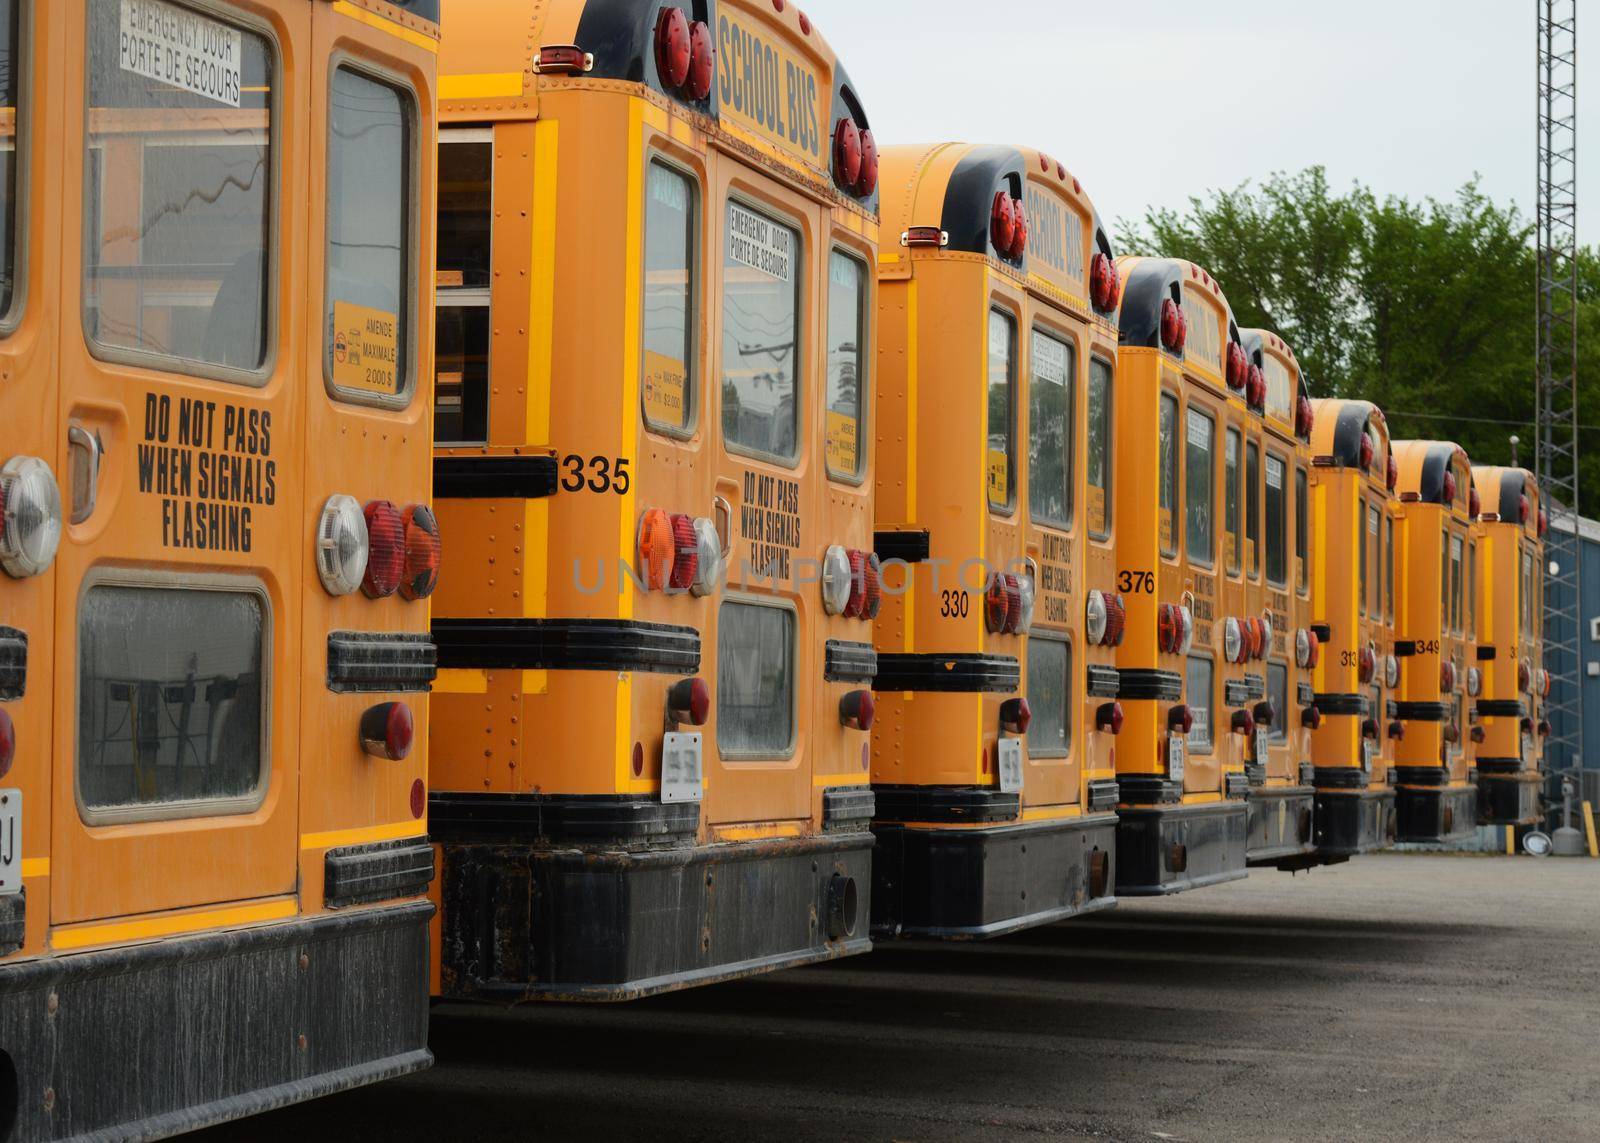 Many school buses parked at the lot while not being used on the roadway.